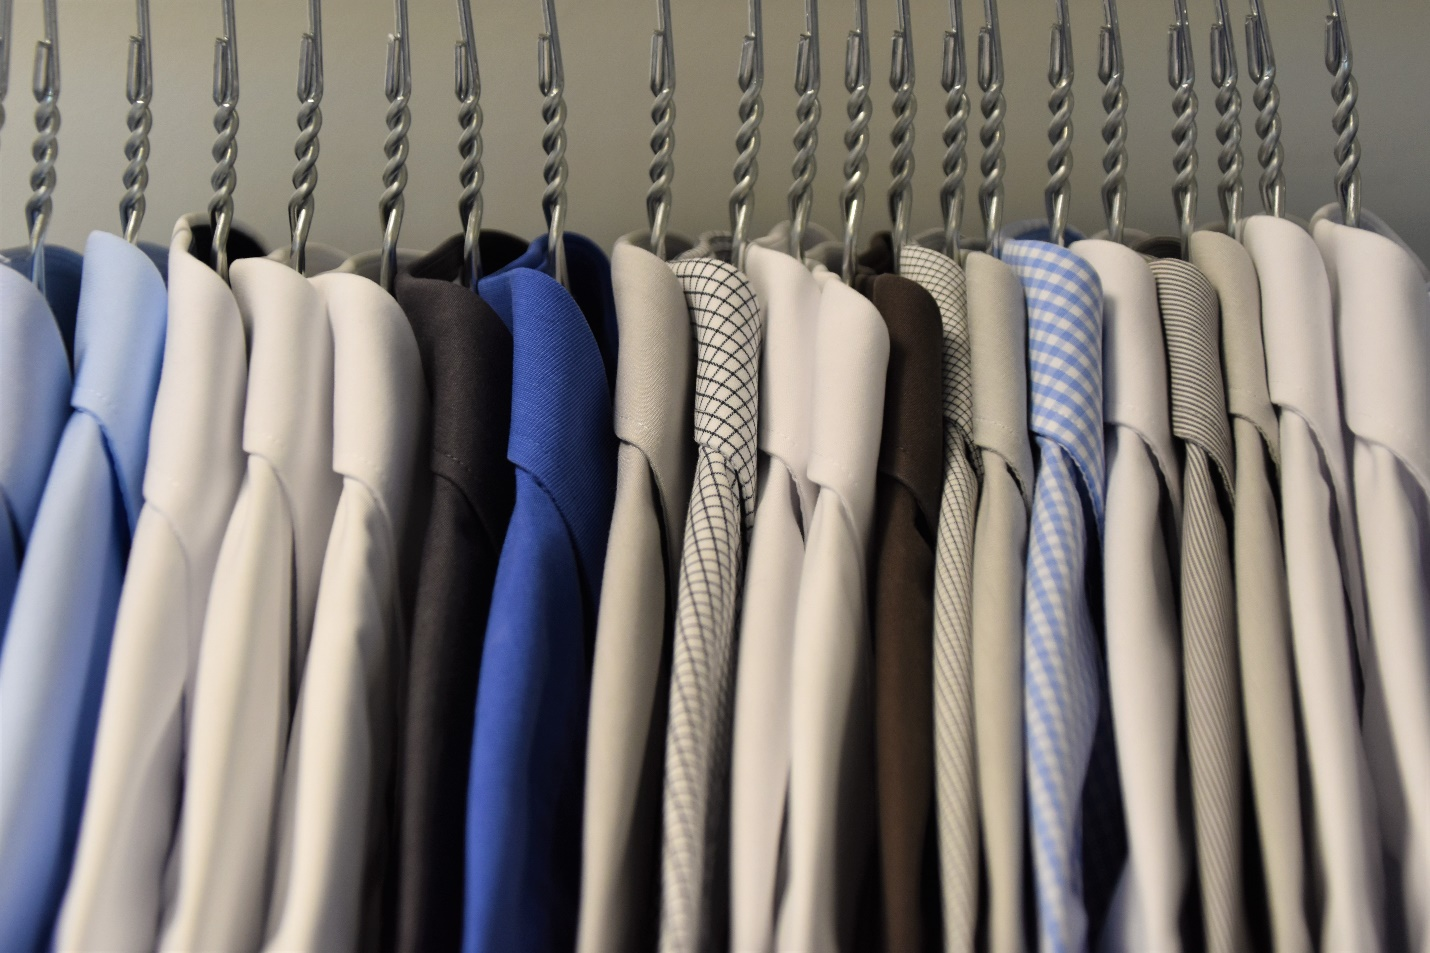 Dry-cleaned and ironed shirts.